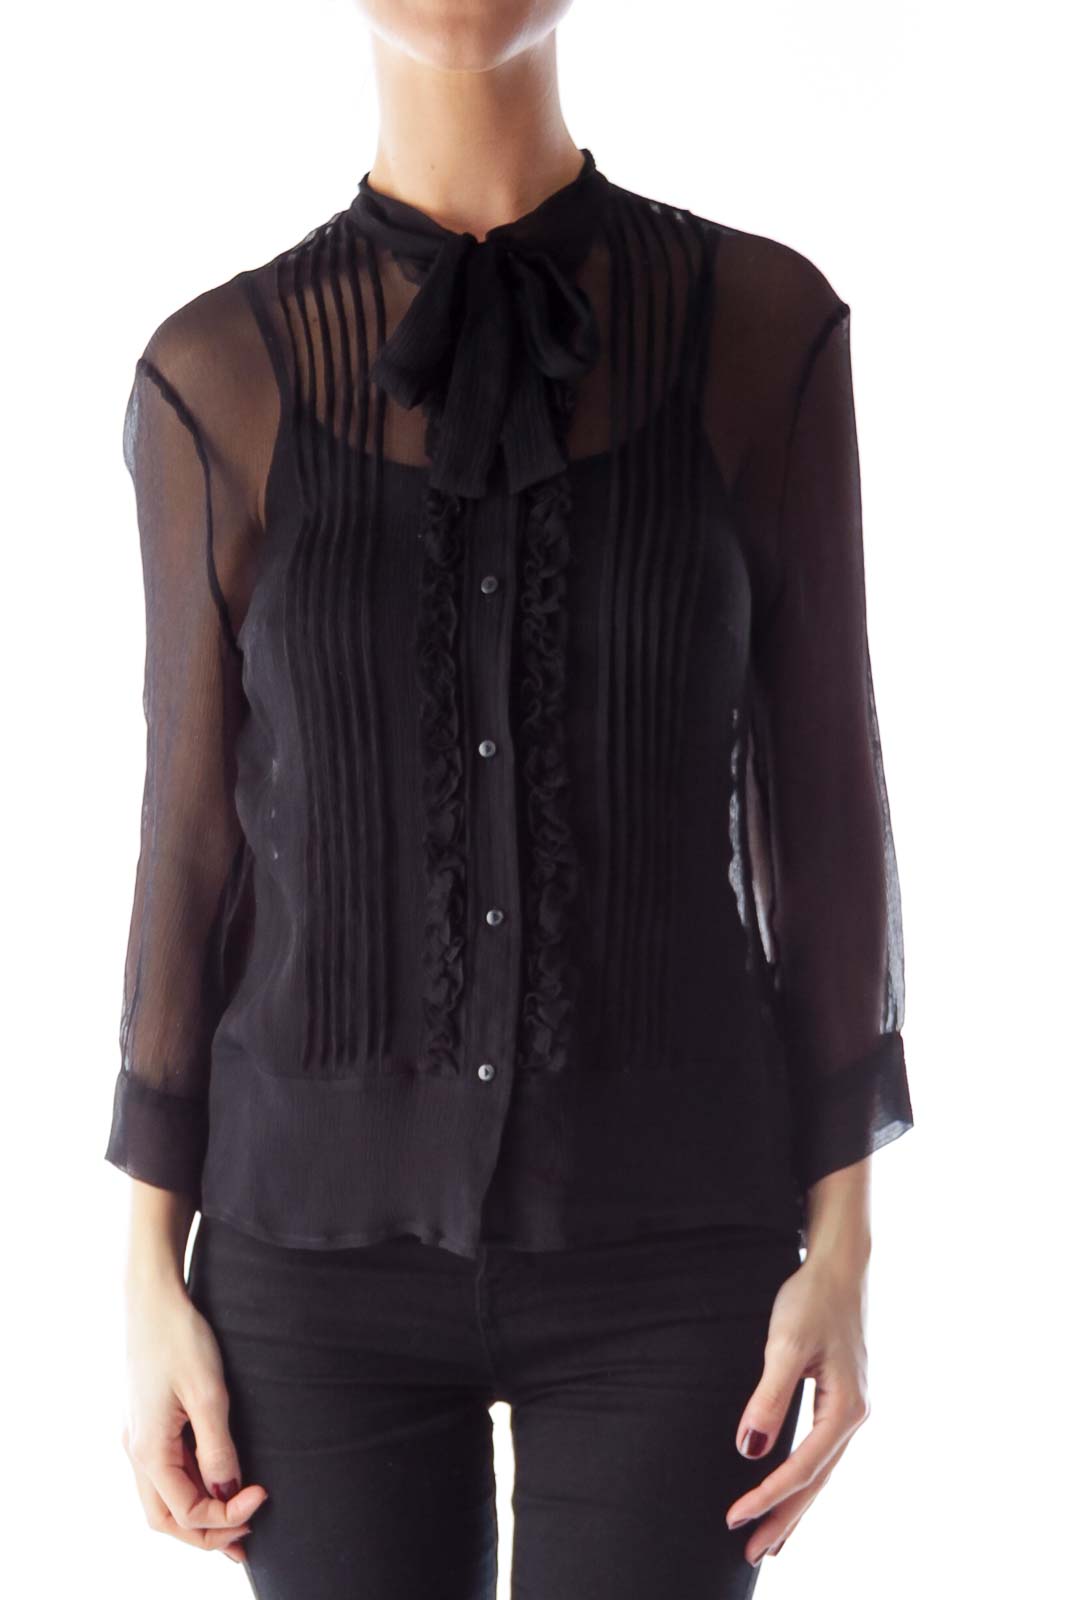 Black See Through Ruffle Blouse Front